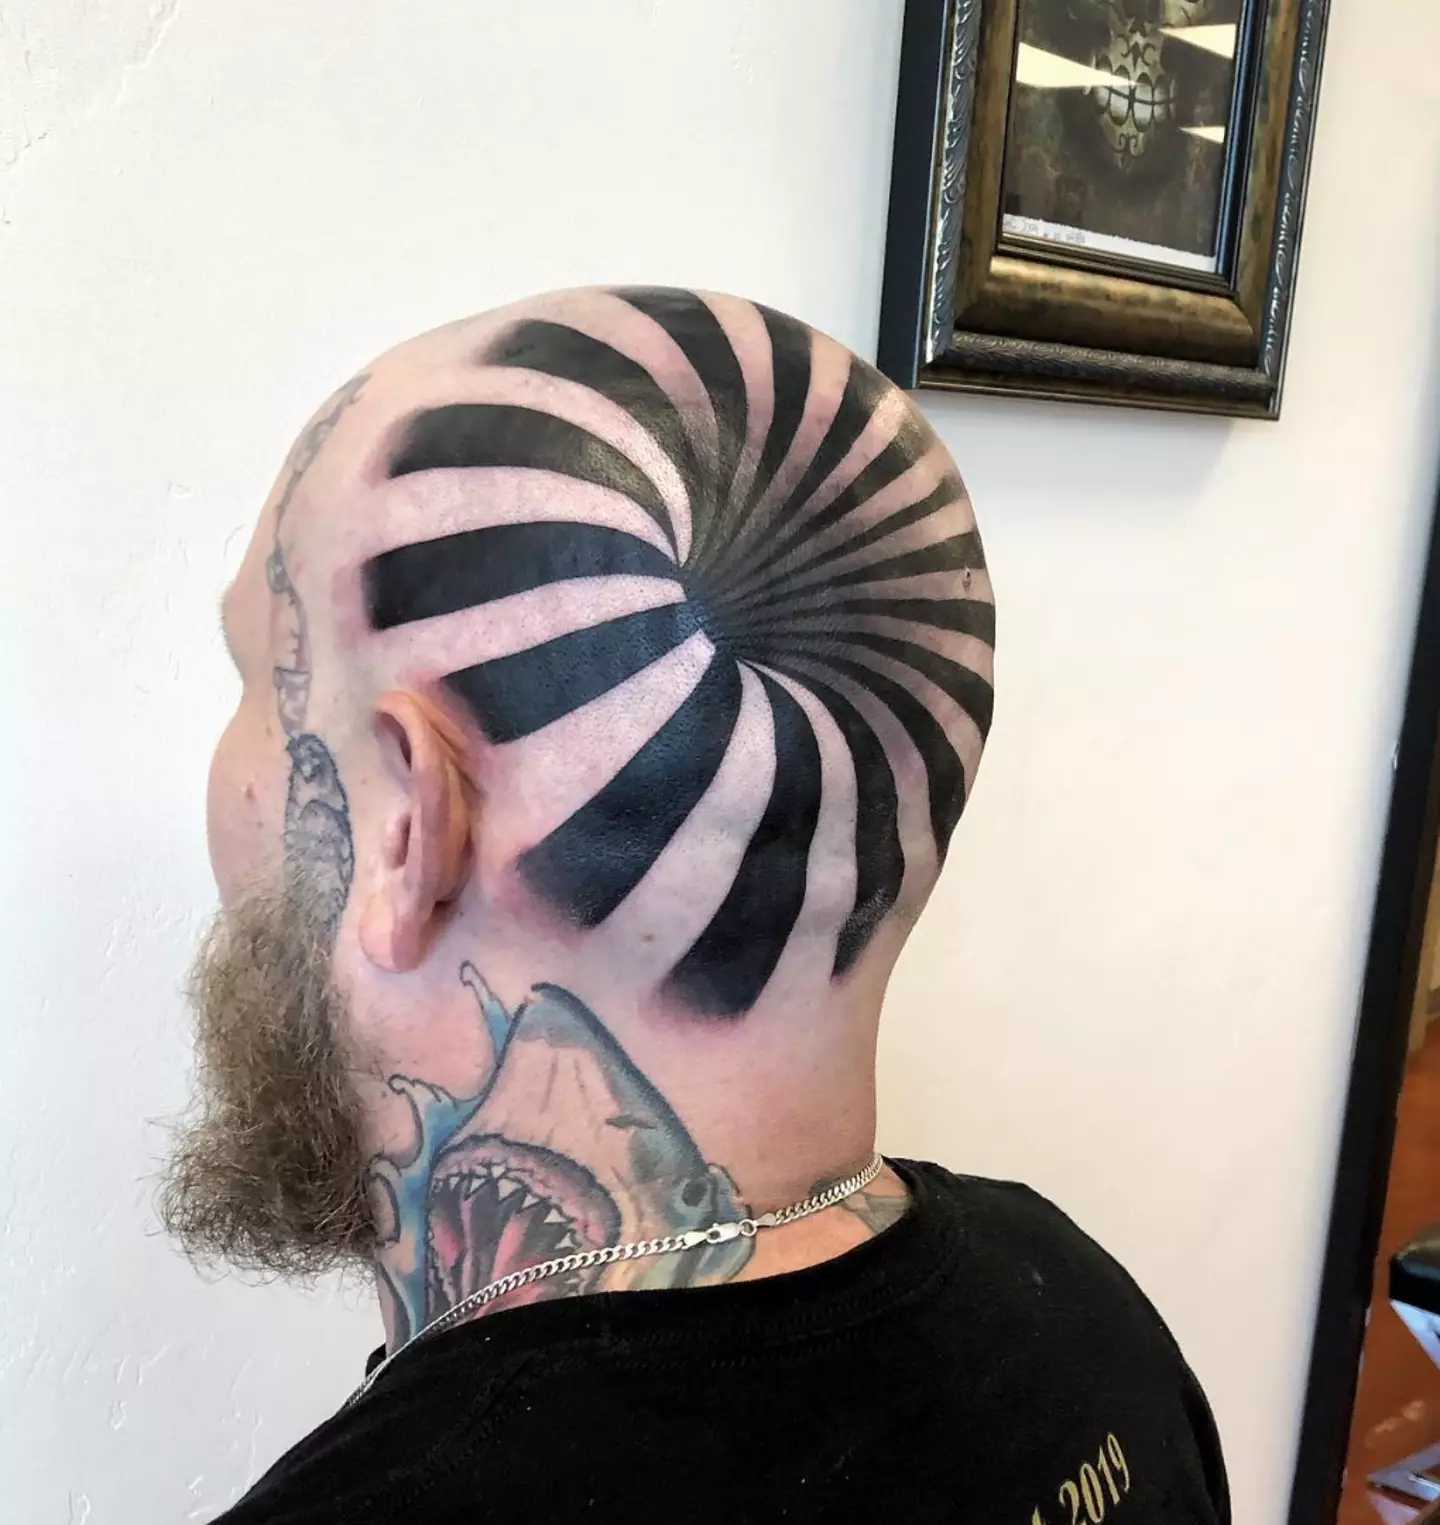 The tattoo has been dubbed one the 'most insane optical illusion'.